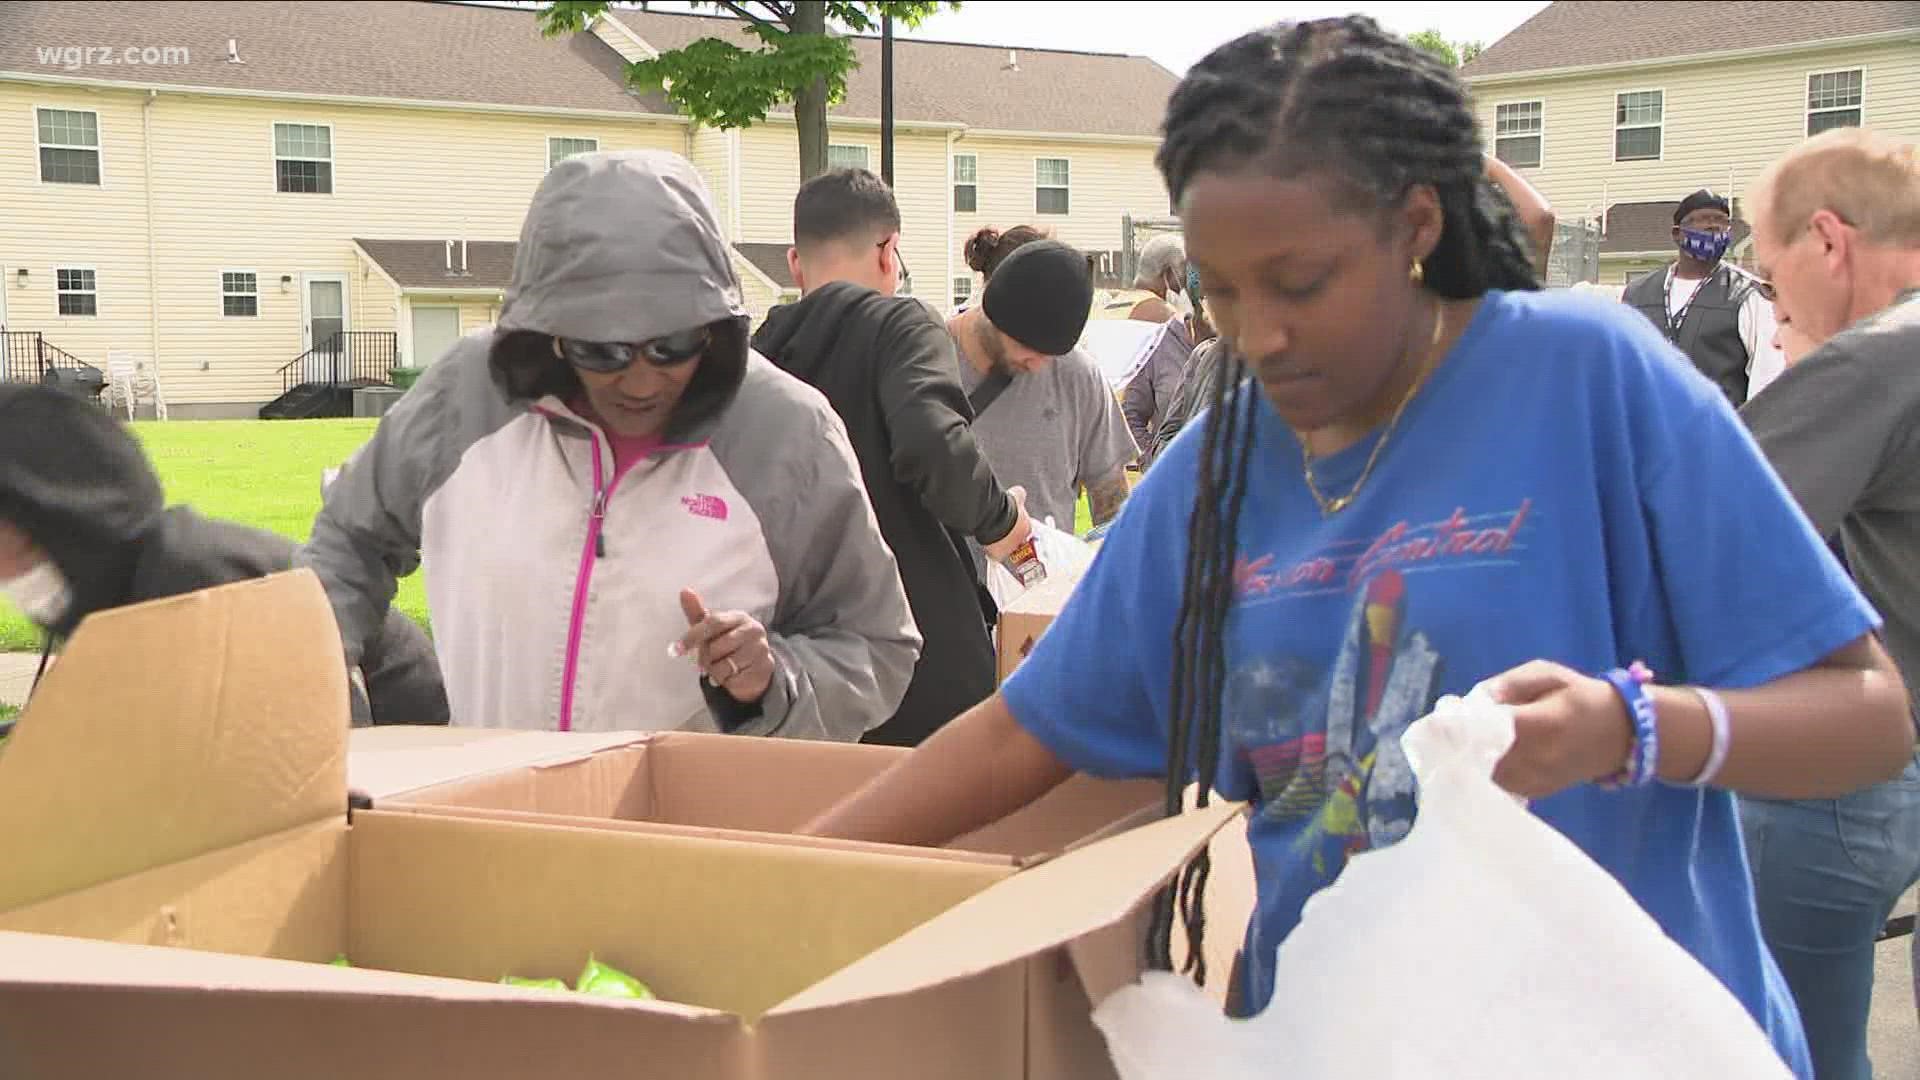 The Buffalo Dream Center hosted a mobile food pantry in the Fredrick Douglass neighborhood at Clinton and Jefferson.